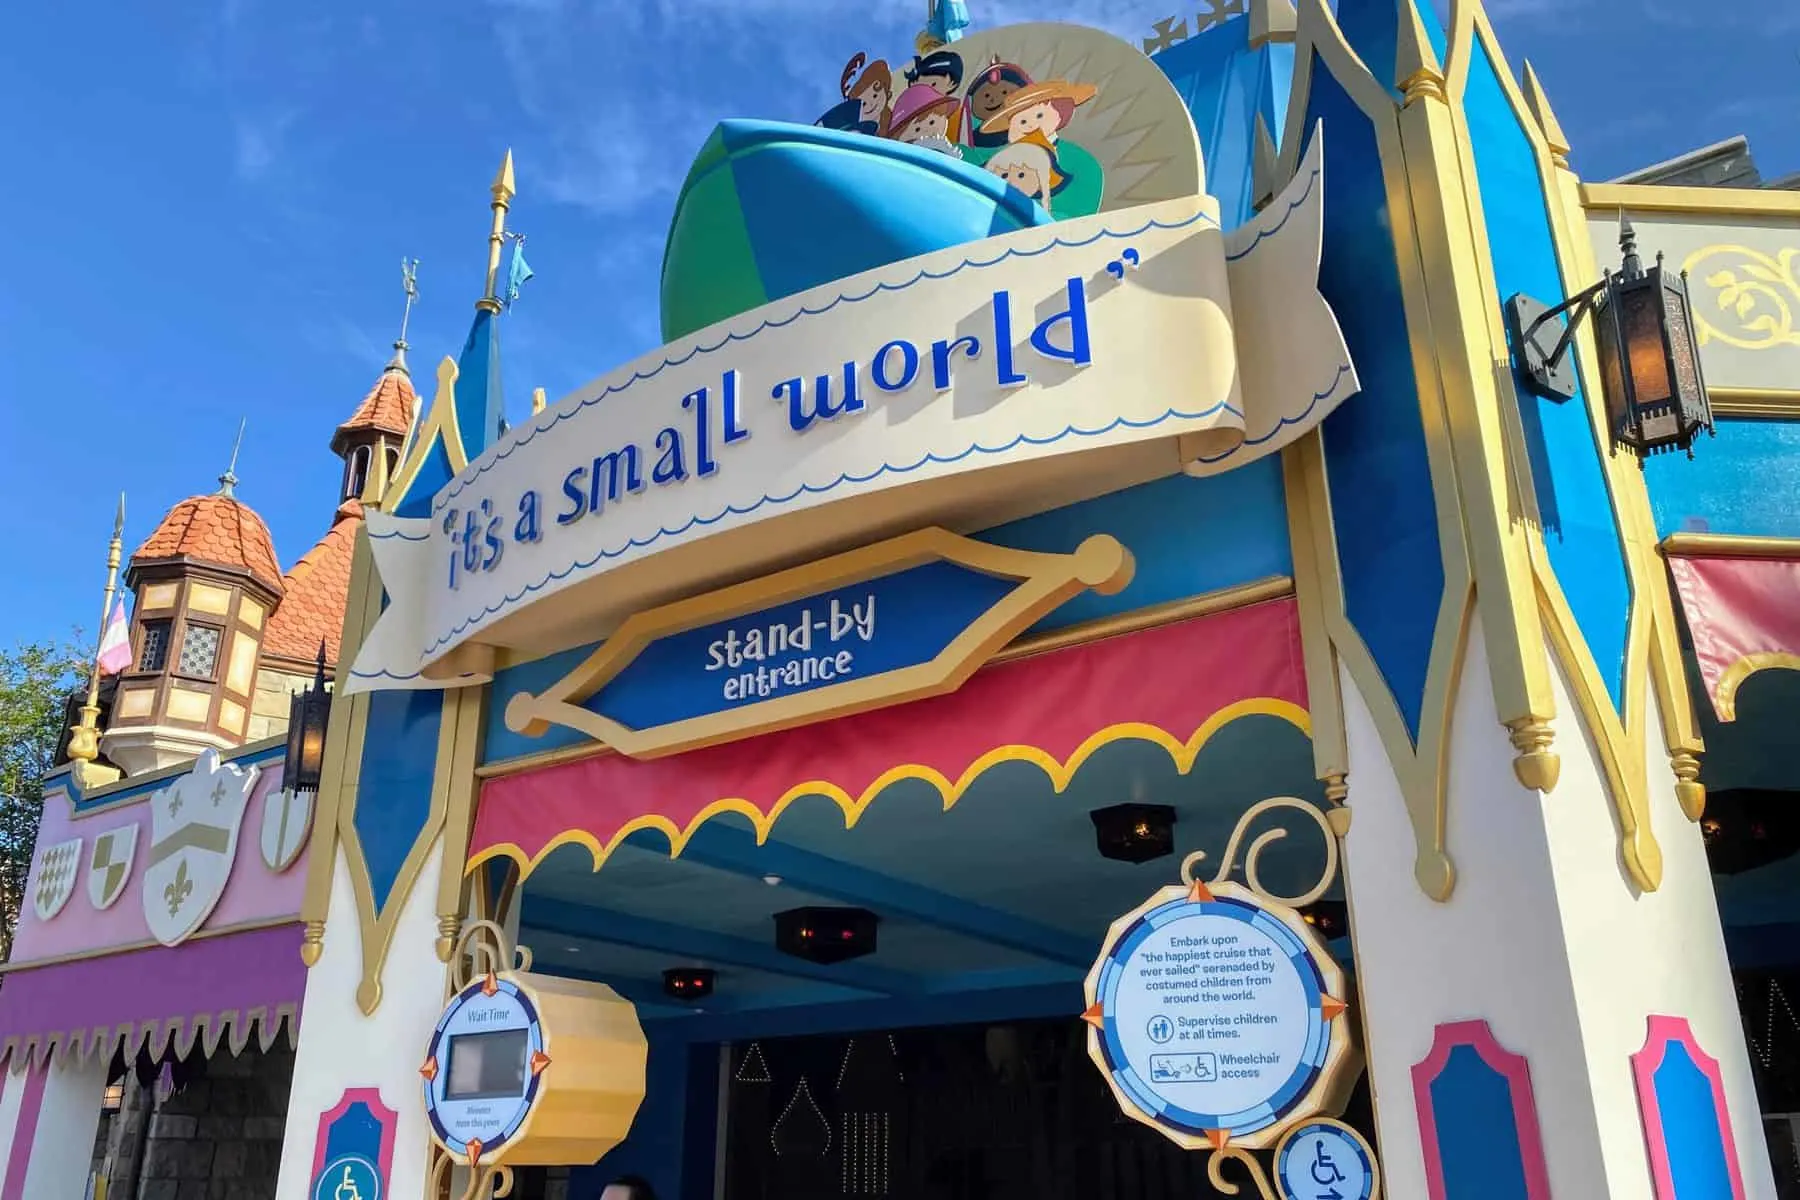 Complete Guide to “it’s a small world” at Magic Kingdom